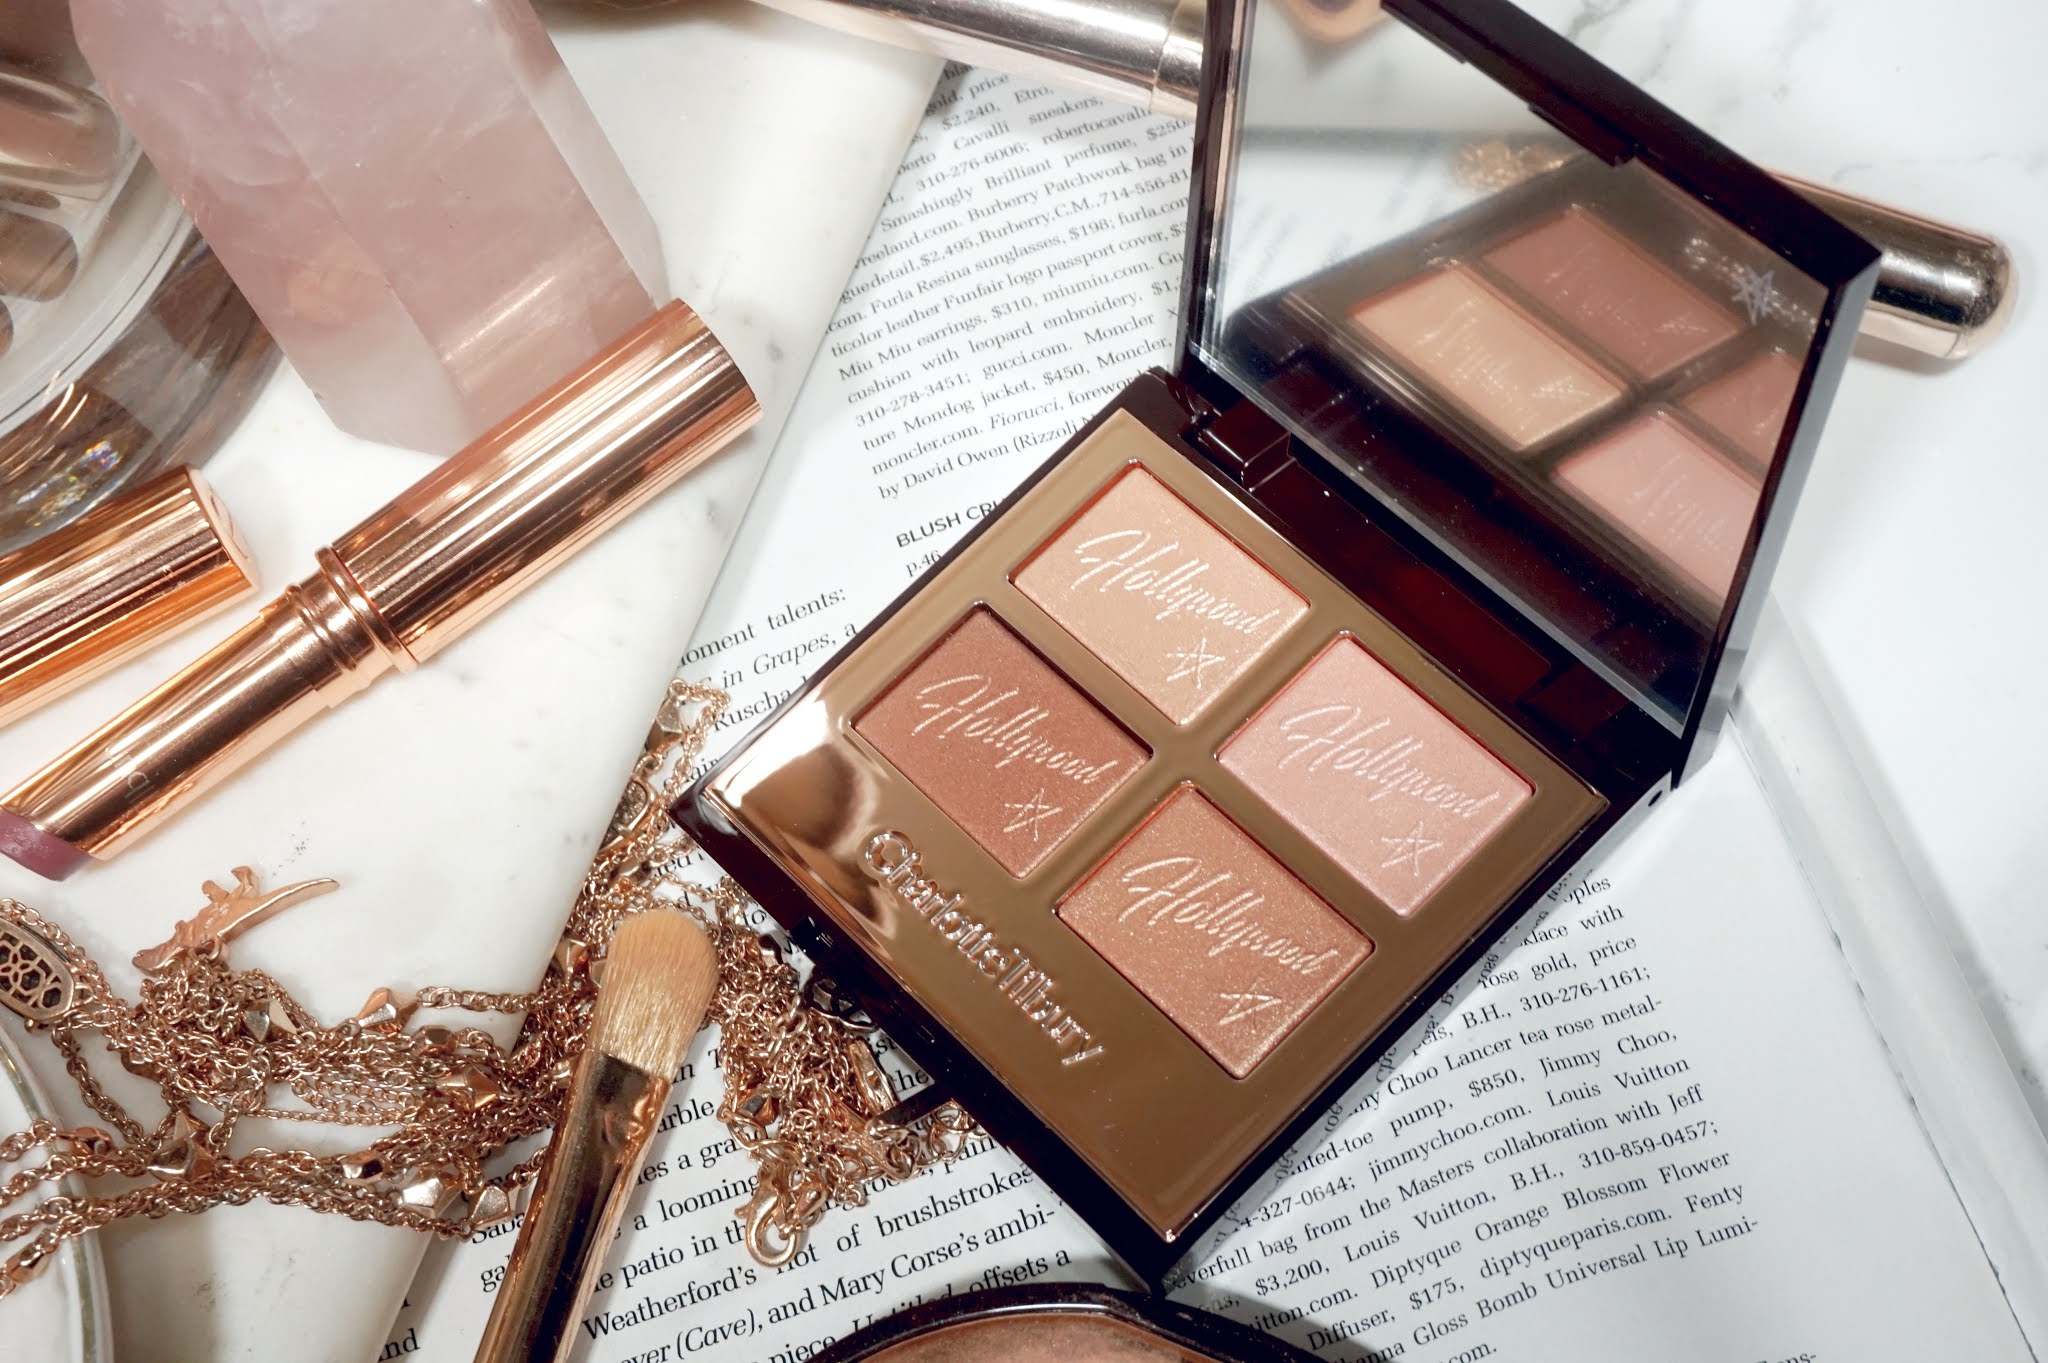 Charlotte Tilbury Hollywood Flawless Eye Filter in Star Aura Review and Swatches